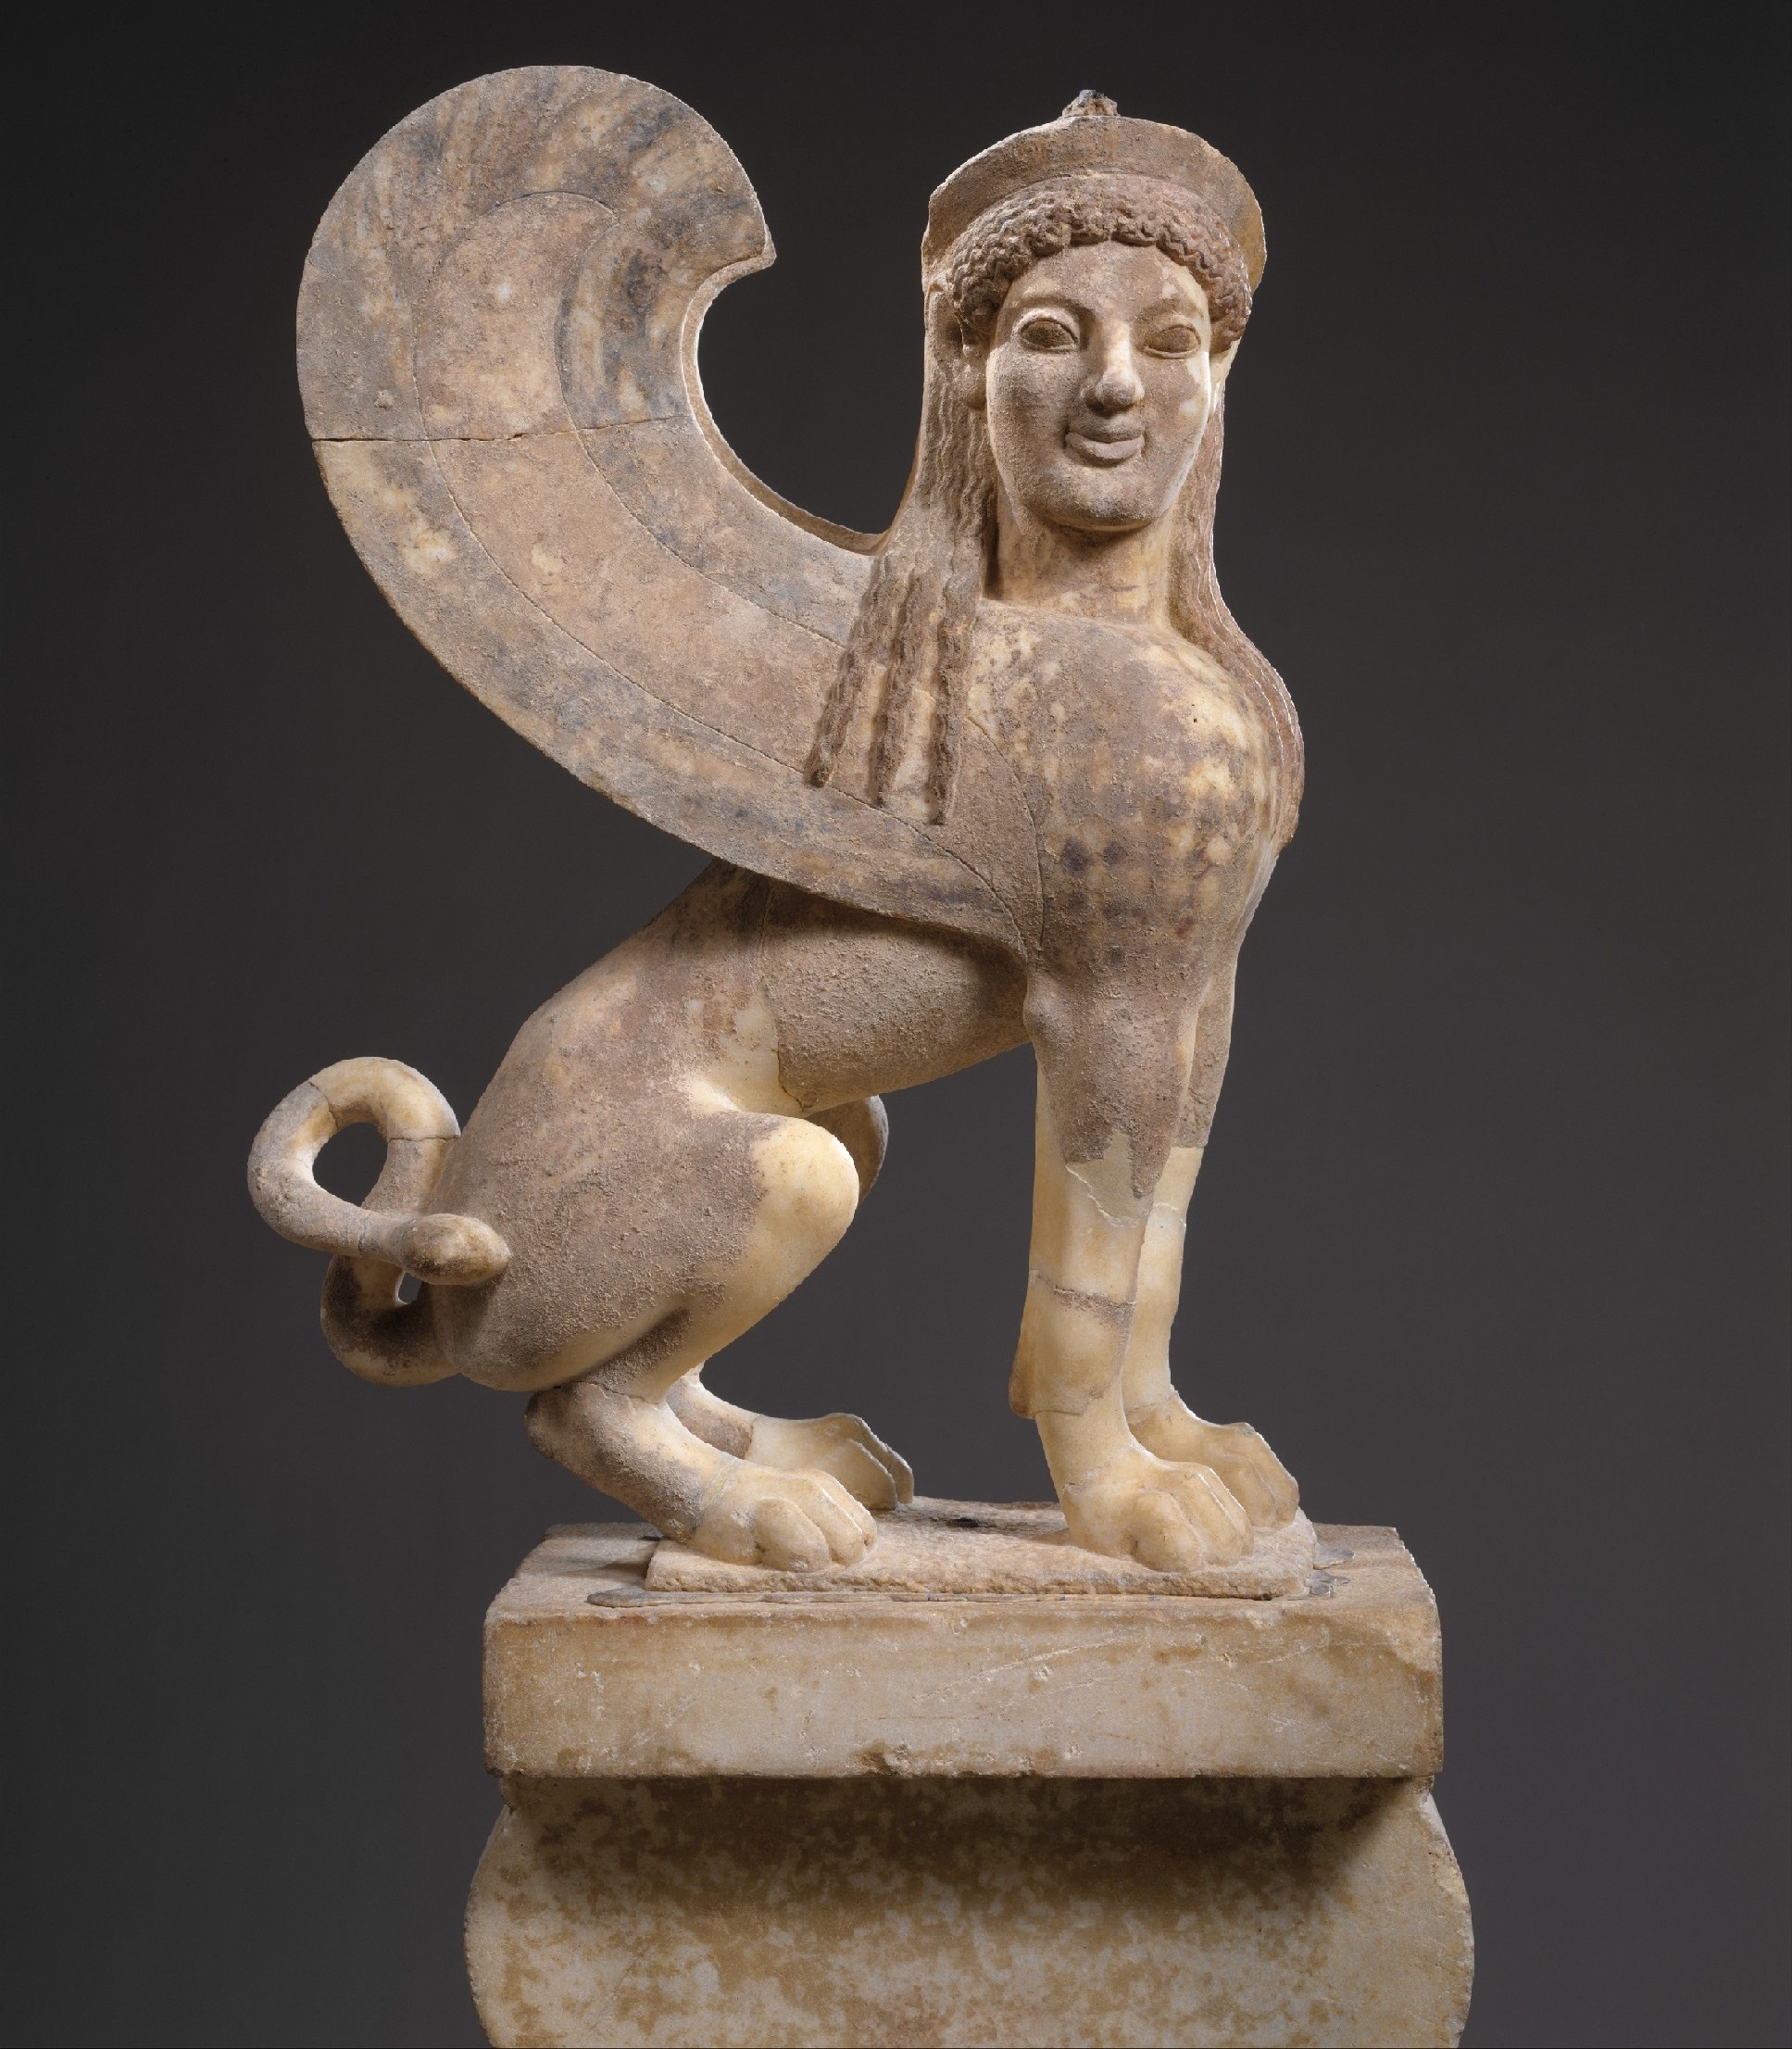 Marble capital and finial in the form of a Sphinx, Greece